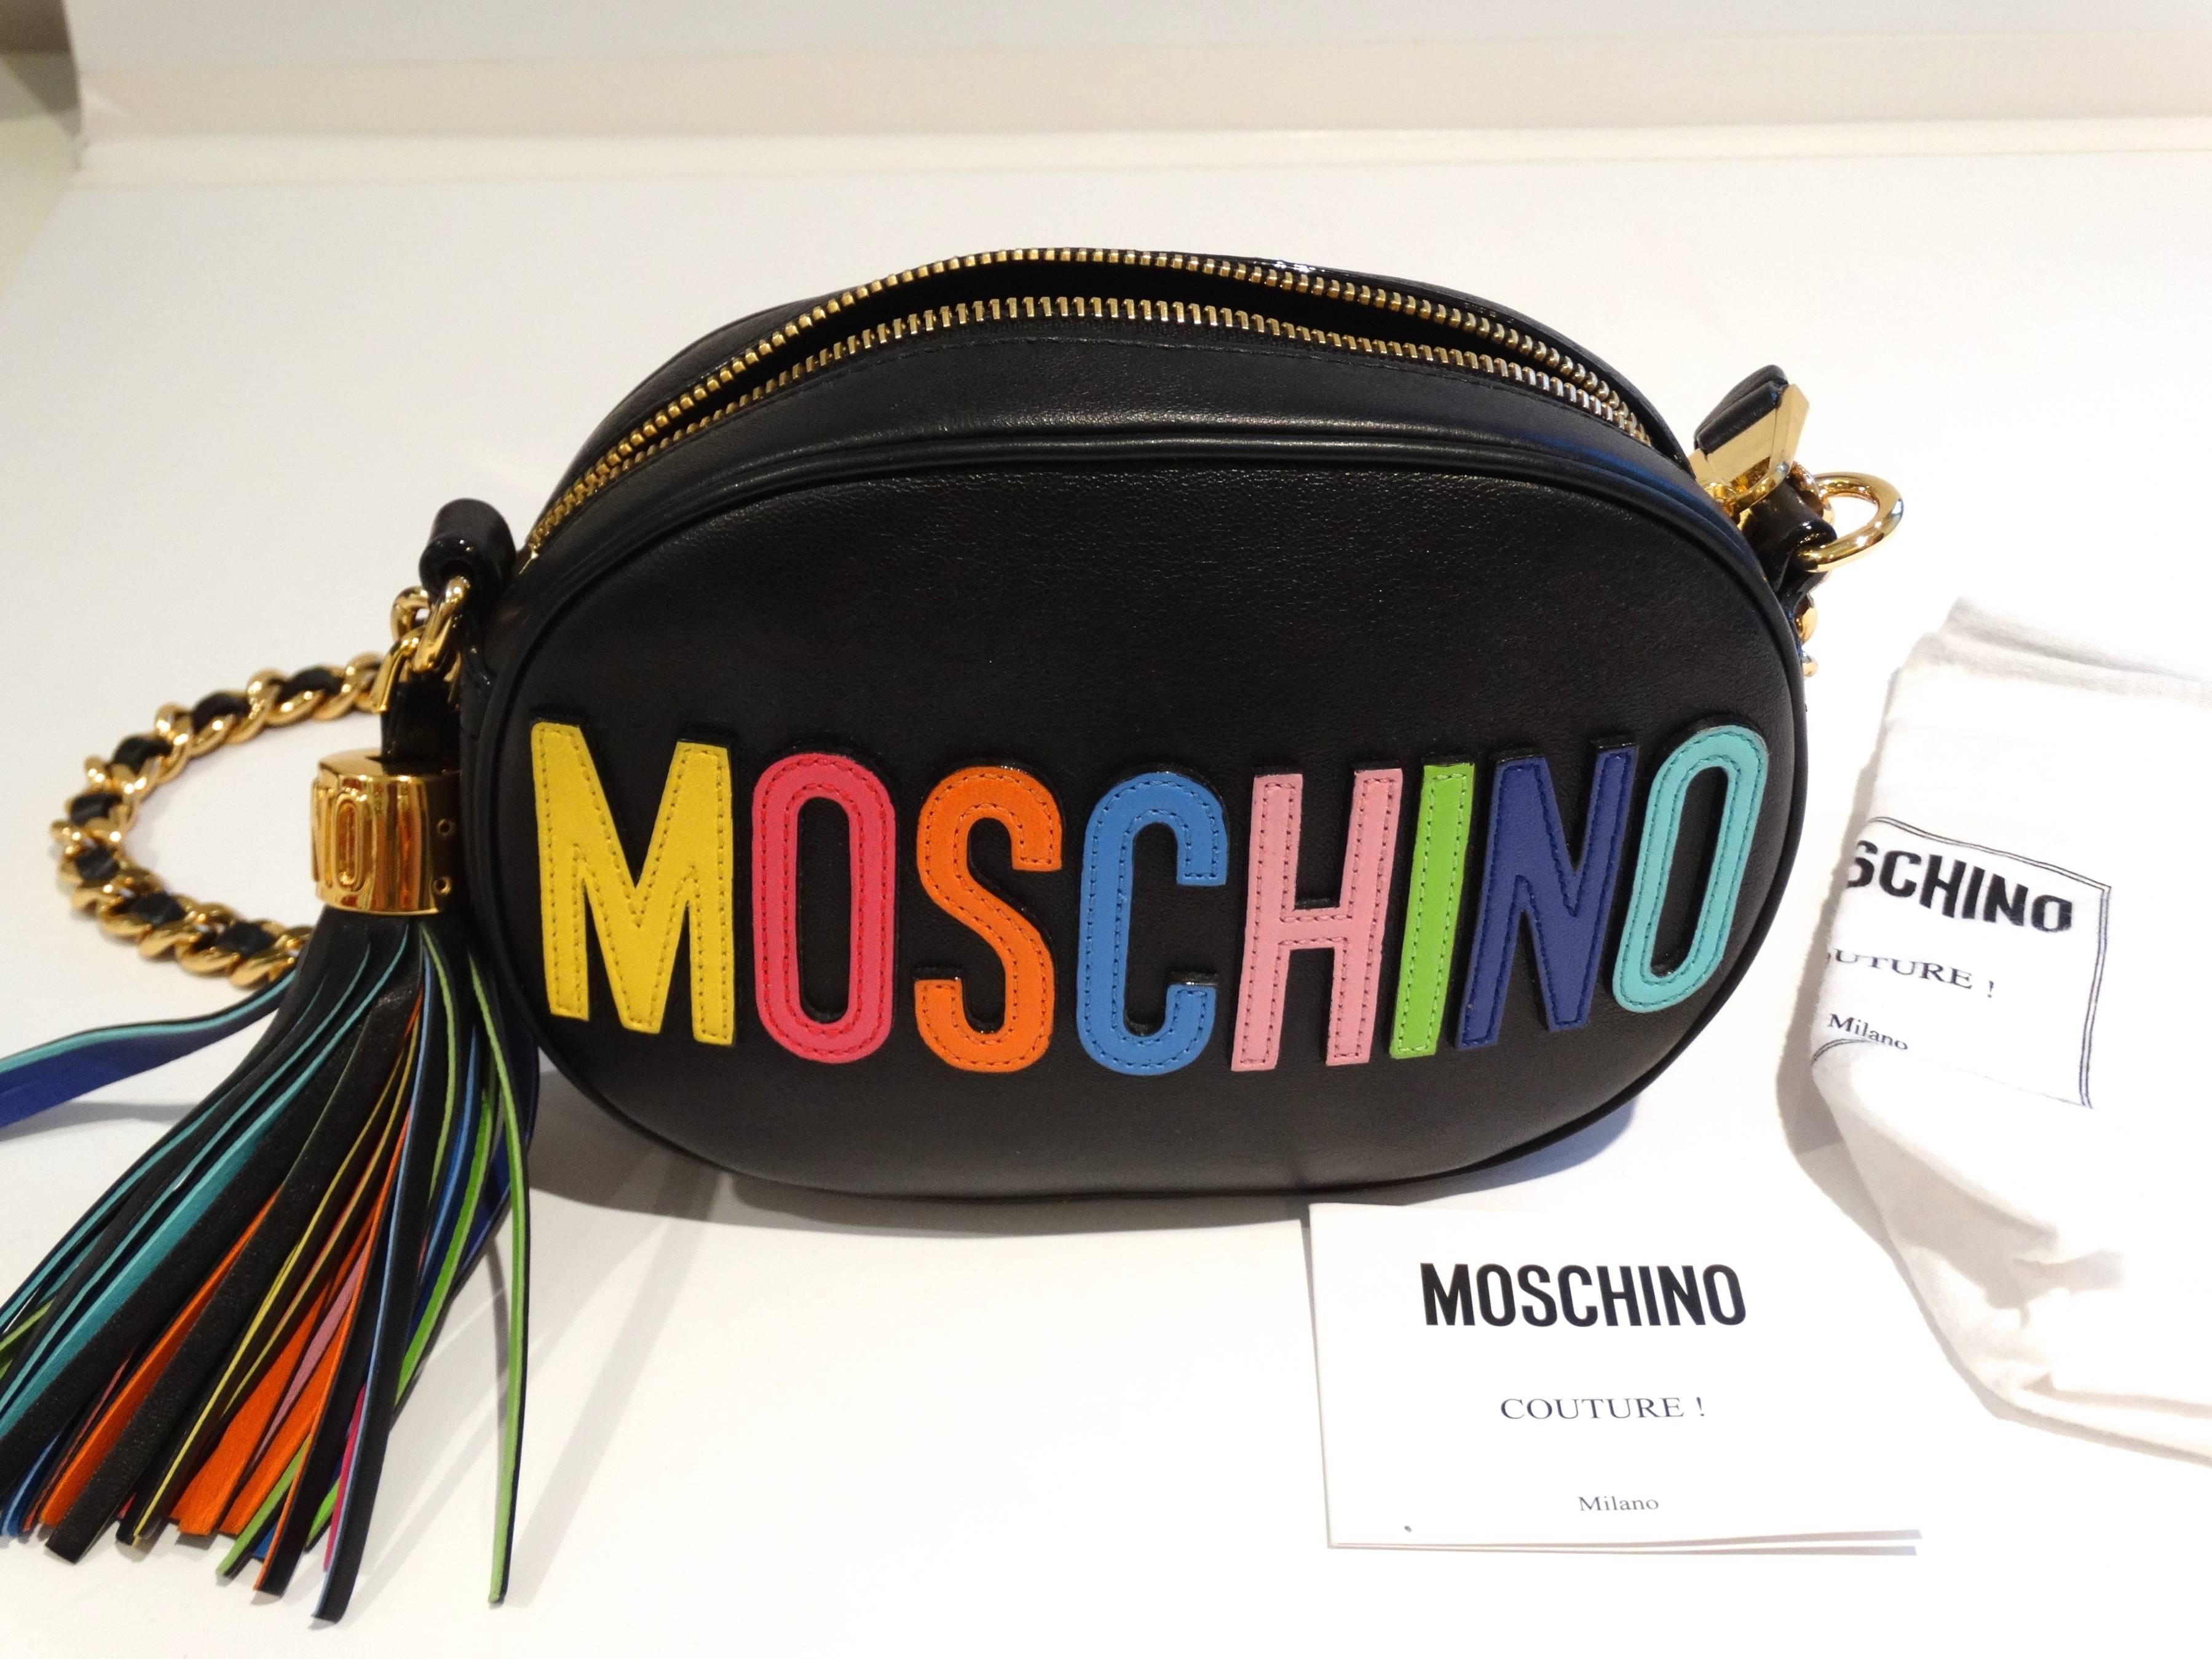 Celebrate Jeremy Scott's Moschino Spring '15 Runway Capsule Collection with this logo-licious crossbody featuring a sized-down silhouette and rainbow-hued letters. A chain-and-leather strap and swishy tassel deliver plenty of street-style swag to